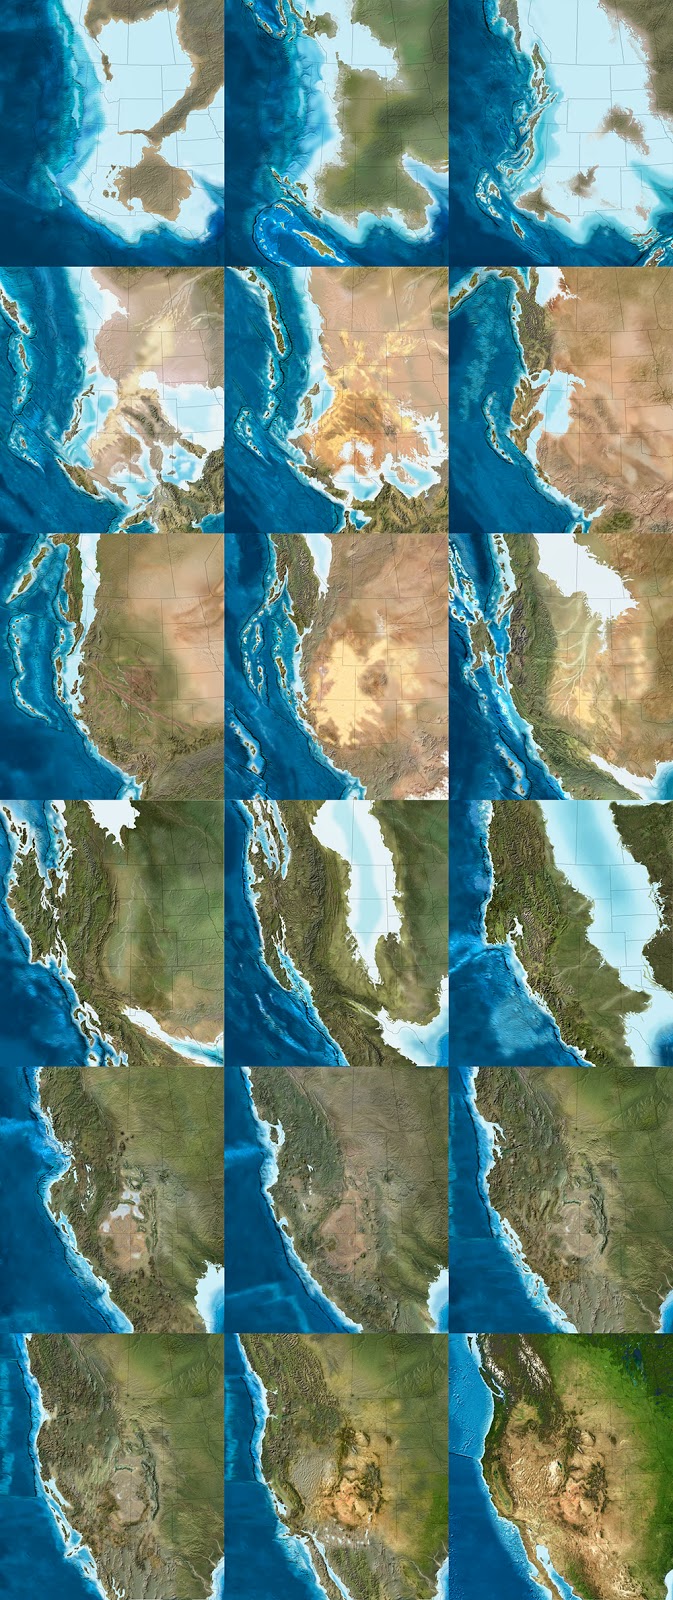 What Did The Continents Look Like Millions Of Years Ago